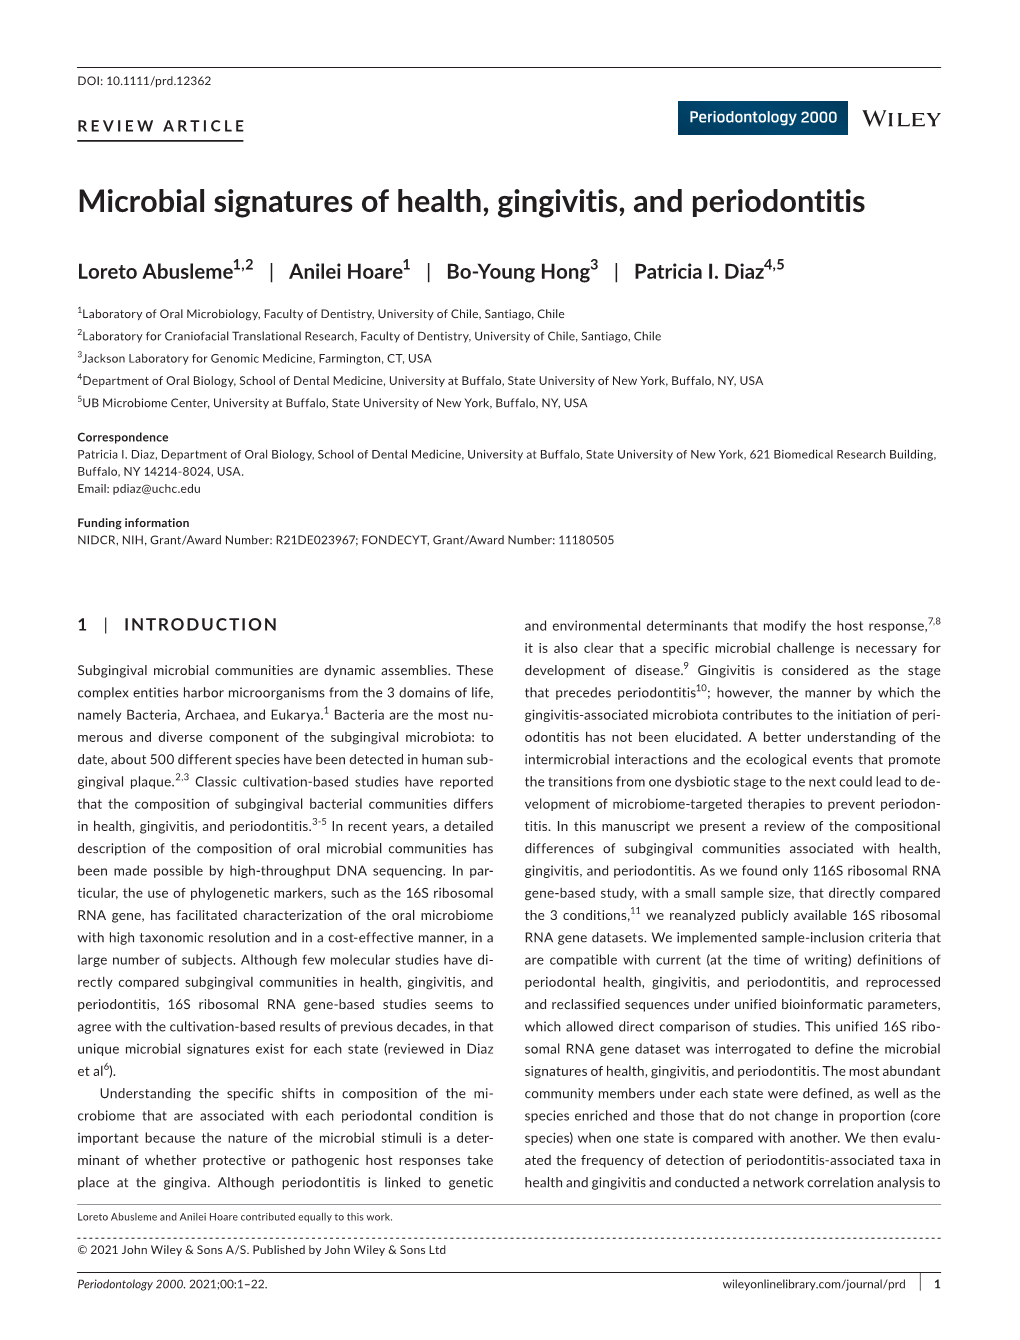 Microbial Signatures of Health, Gingivitis, and Periodontitis